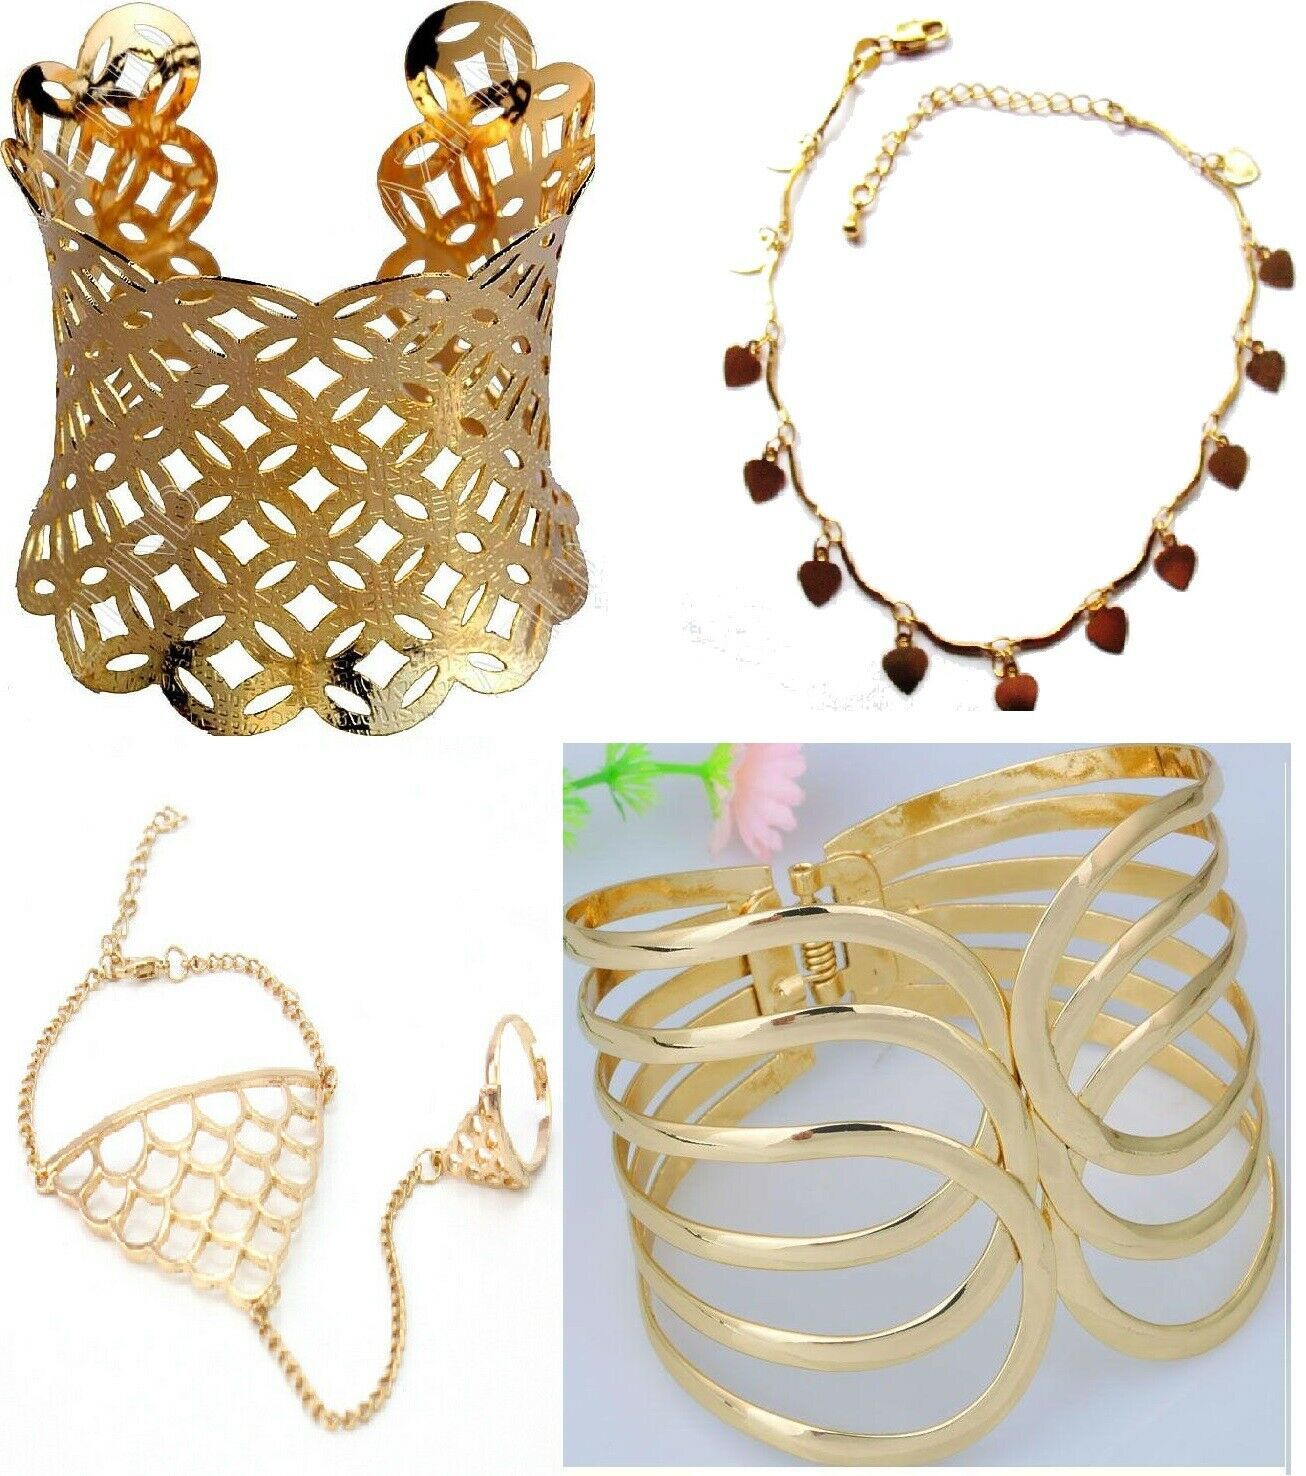 Gold Plated Open Cuff Bracelet Bangle,Link Finger Chain Ring,Gold Filled Heart - $11.99 - $15.00